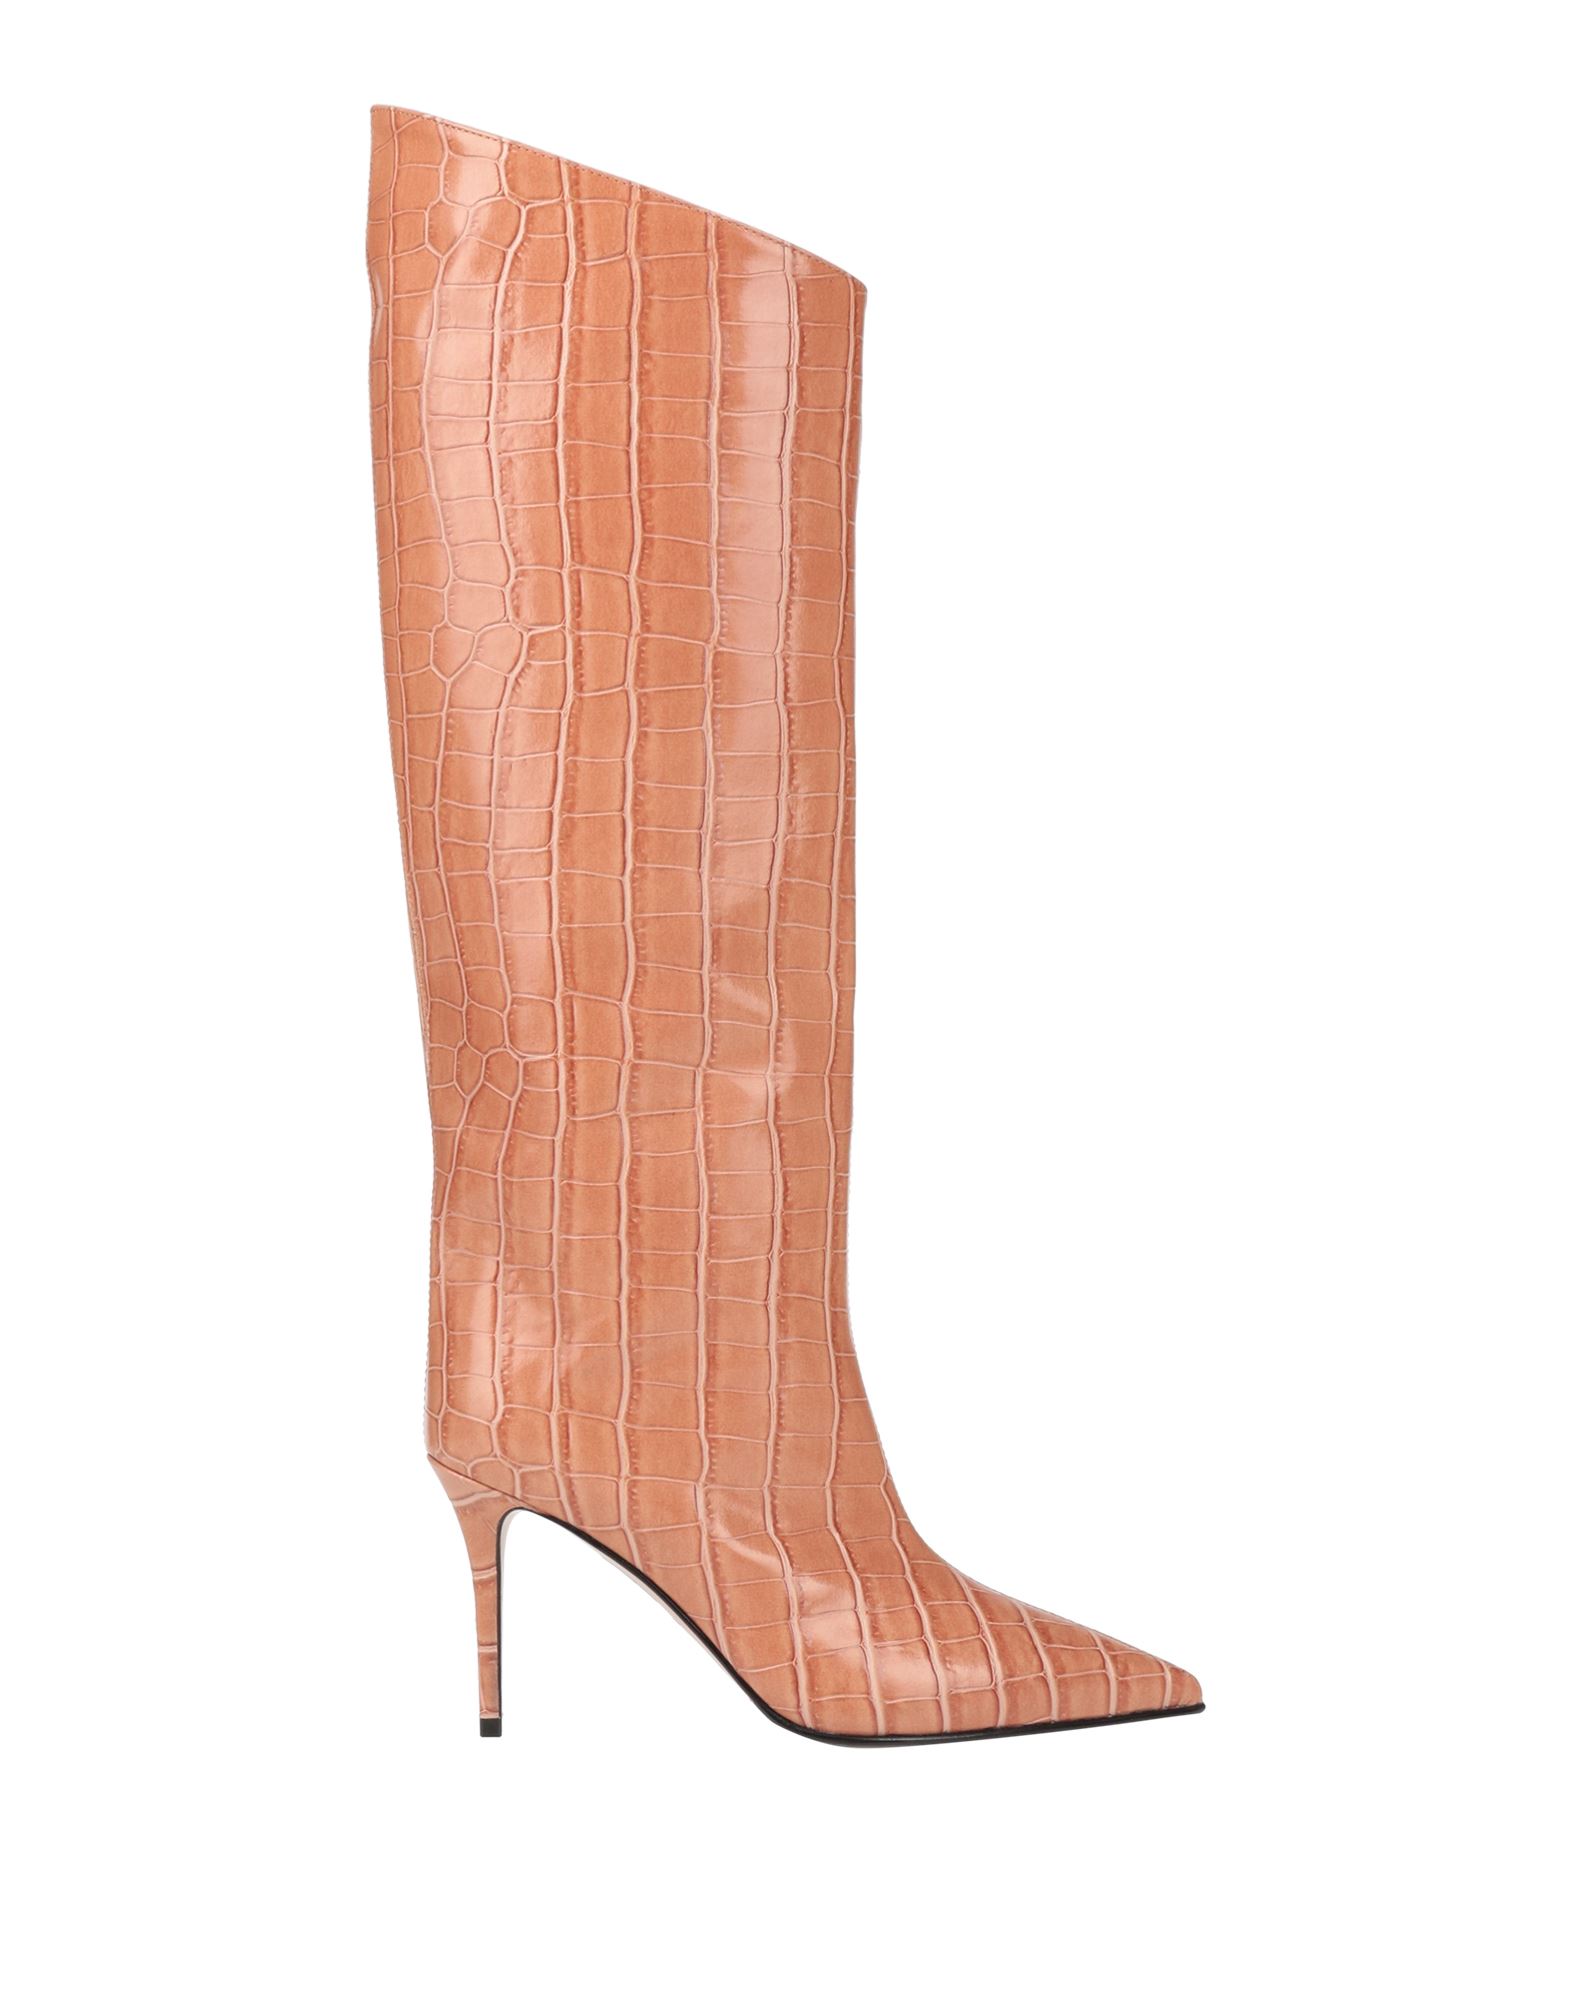 Le Silla Knee Boots In Beige